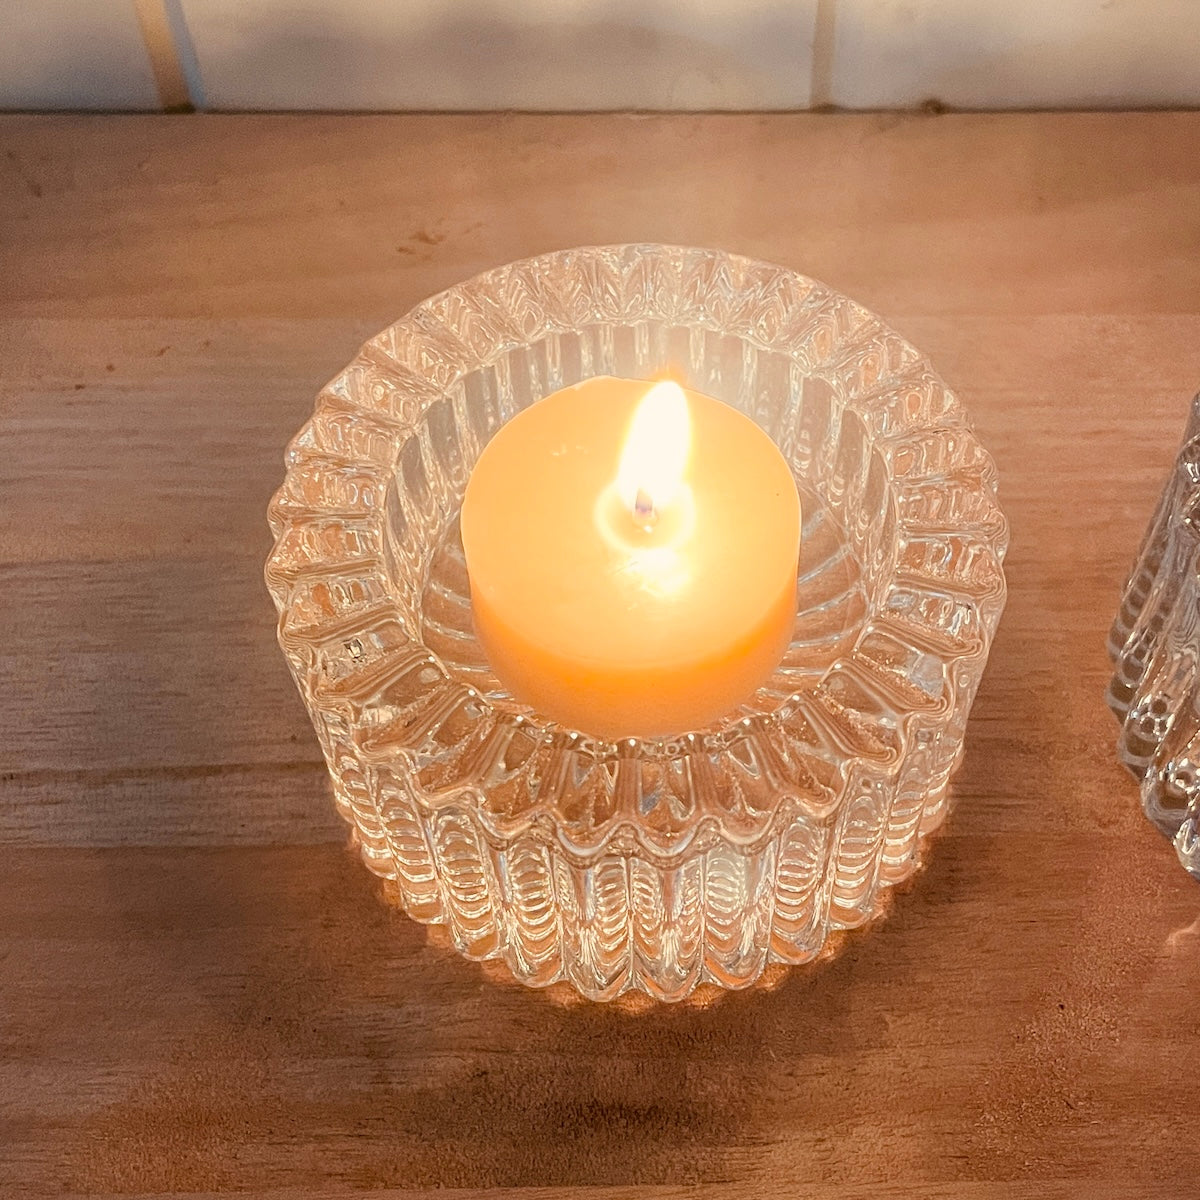 Crystal style 2 in 1 candle holder